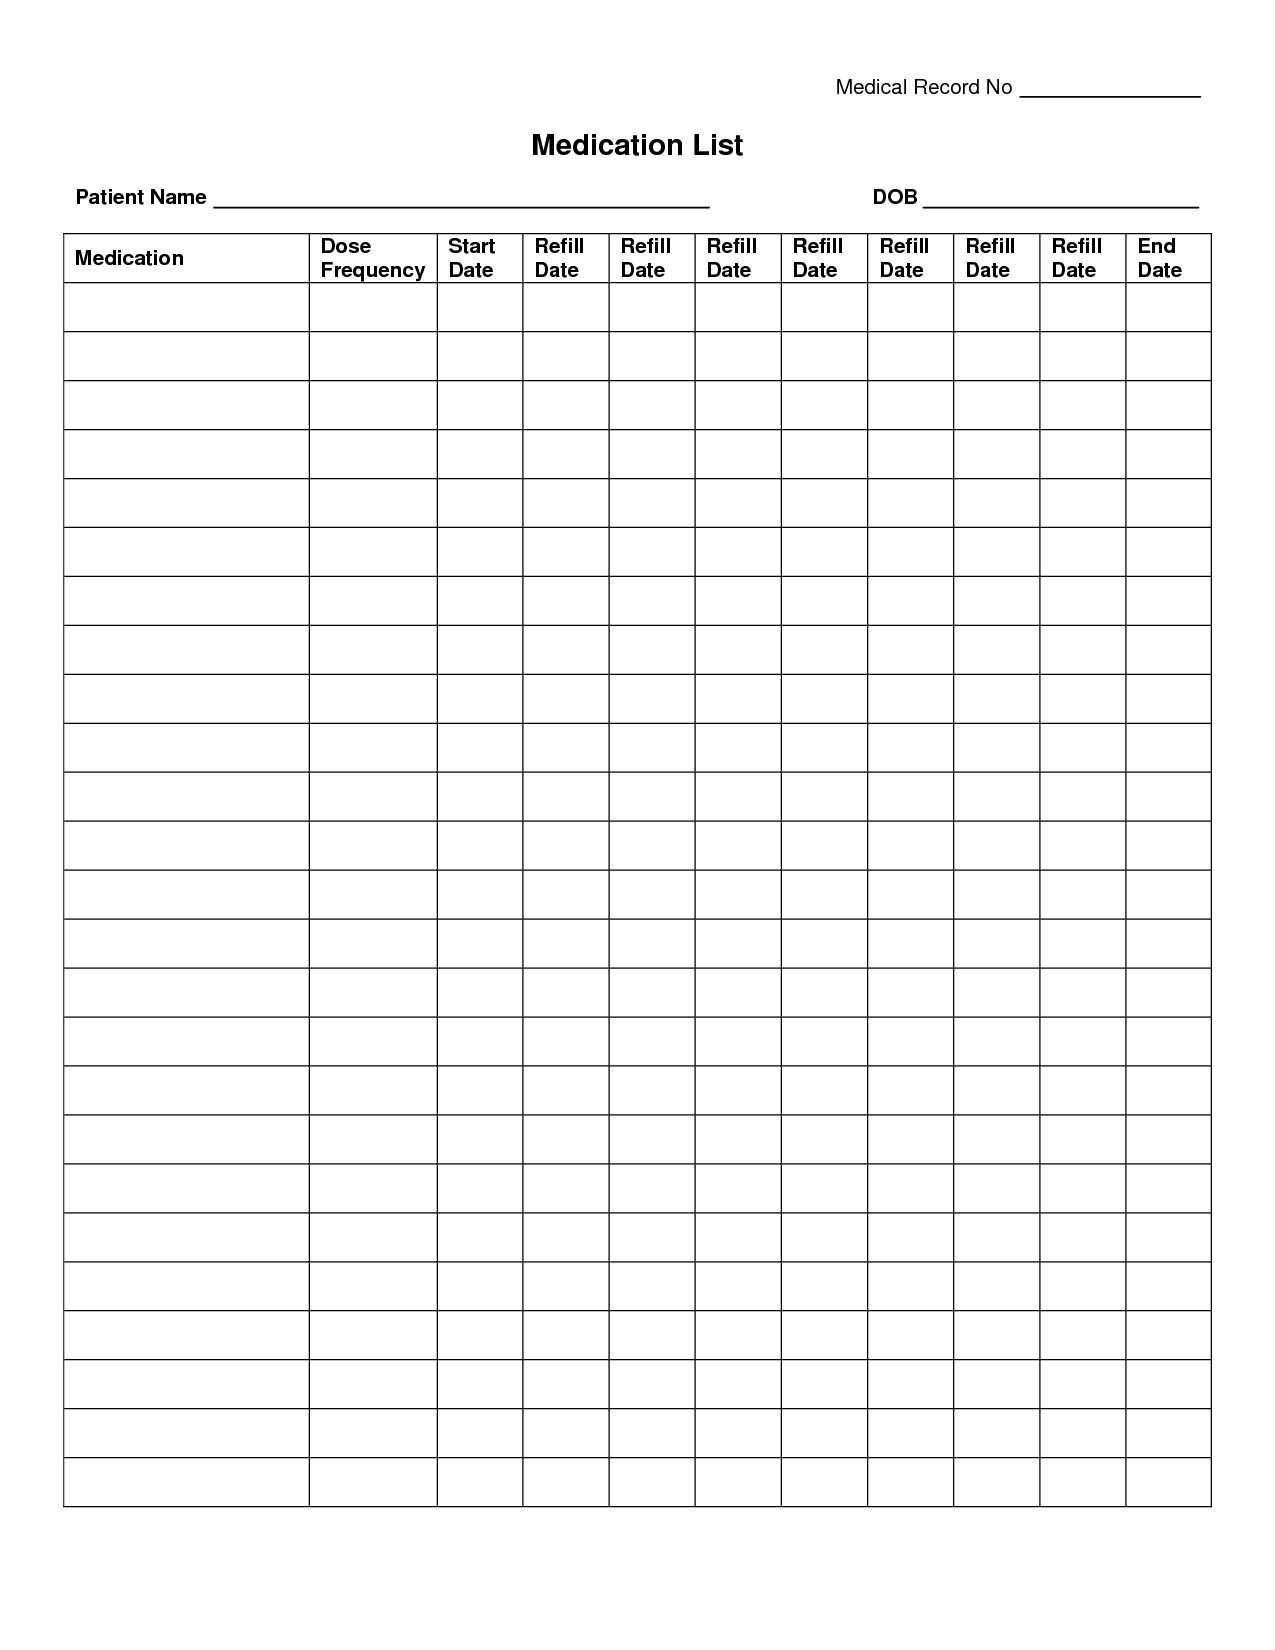 Free Medication Administration Record Template Excel - Yahoo Image - Free Printable Medication List